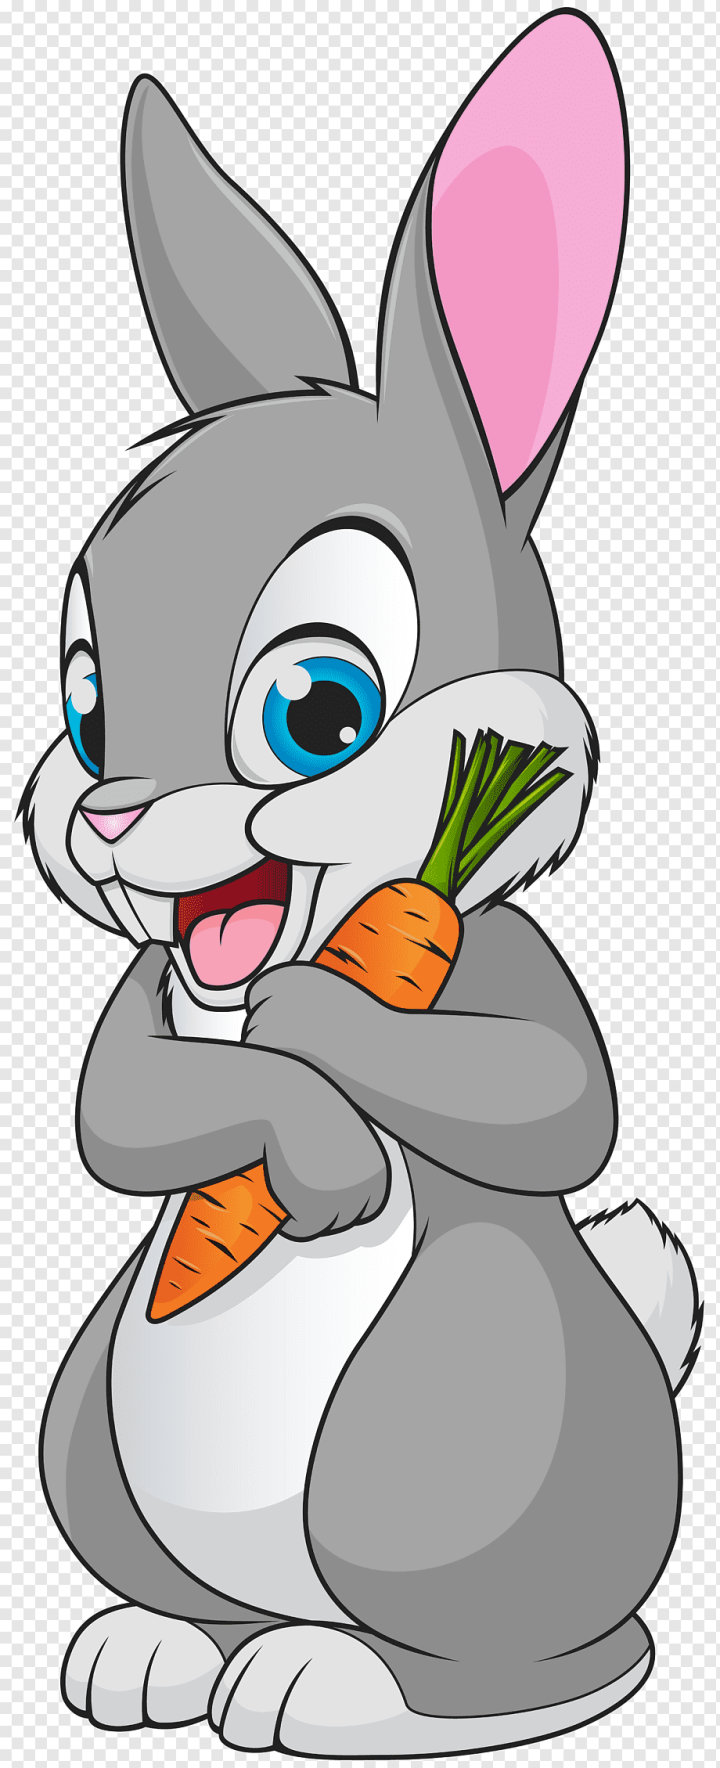 mammal,animals,vertebrate,hare,fictional Character,cartoon,tail,whiskers,animation,stock Photography,rabits And Hares,art,best Bunnies,drawing,domestic Rabbit,cat,Bugs Bunny,Easter Bunny,Bunnies,Rabbit,png,transparent,free download,png